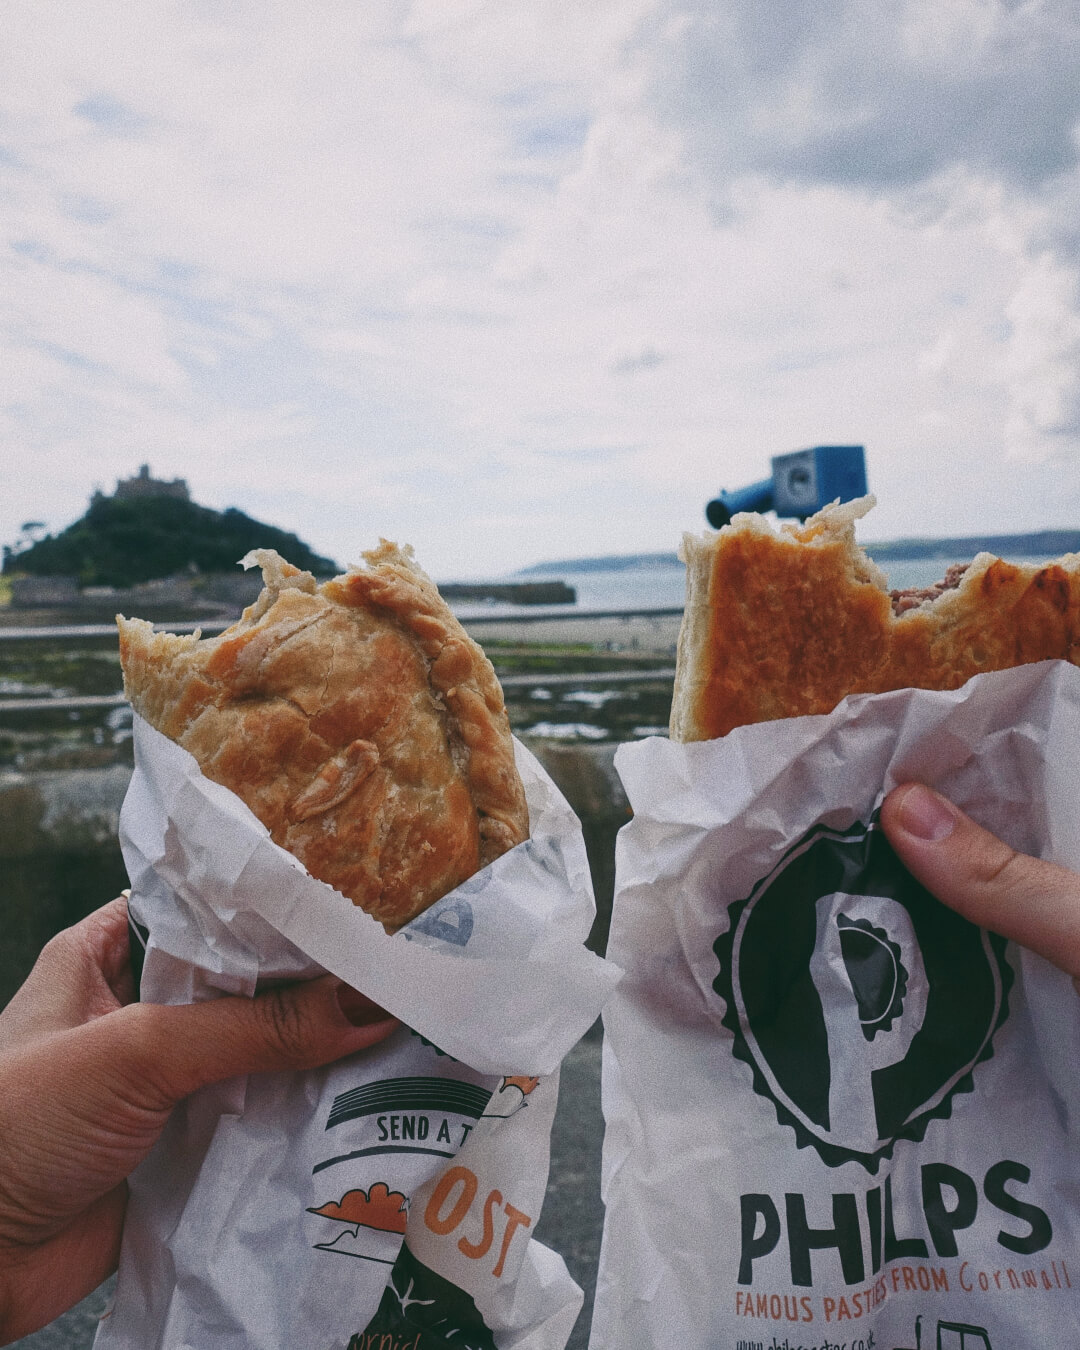 Philips pasties in Cornwall